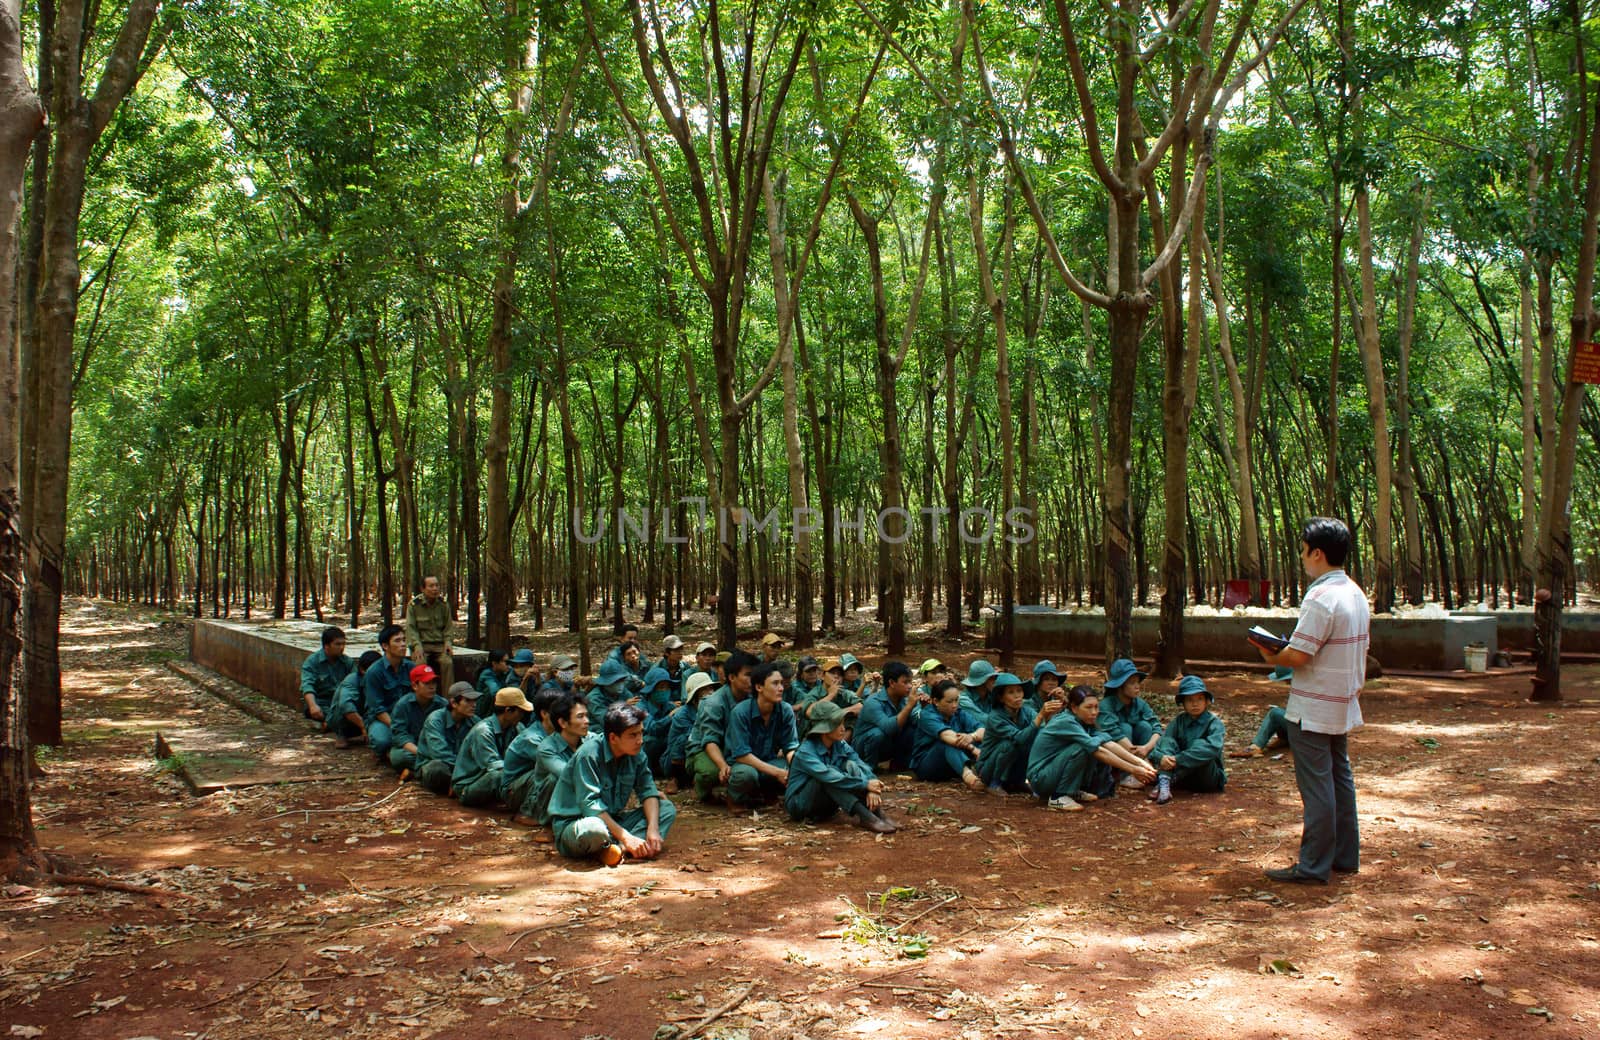 After working day, Dong Phu plantation's rubber worker meeting with team leader to report their work and listen affair content to next day. Binh Phuoc,Viet Nam-  May 9, 2013